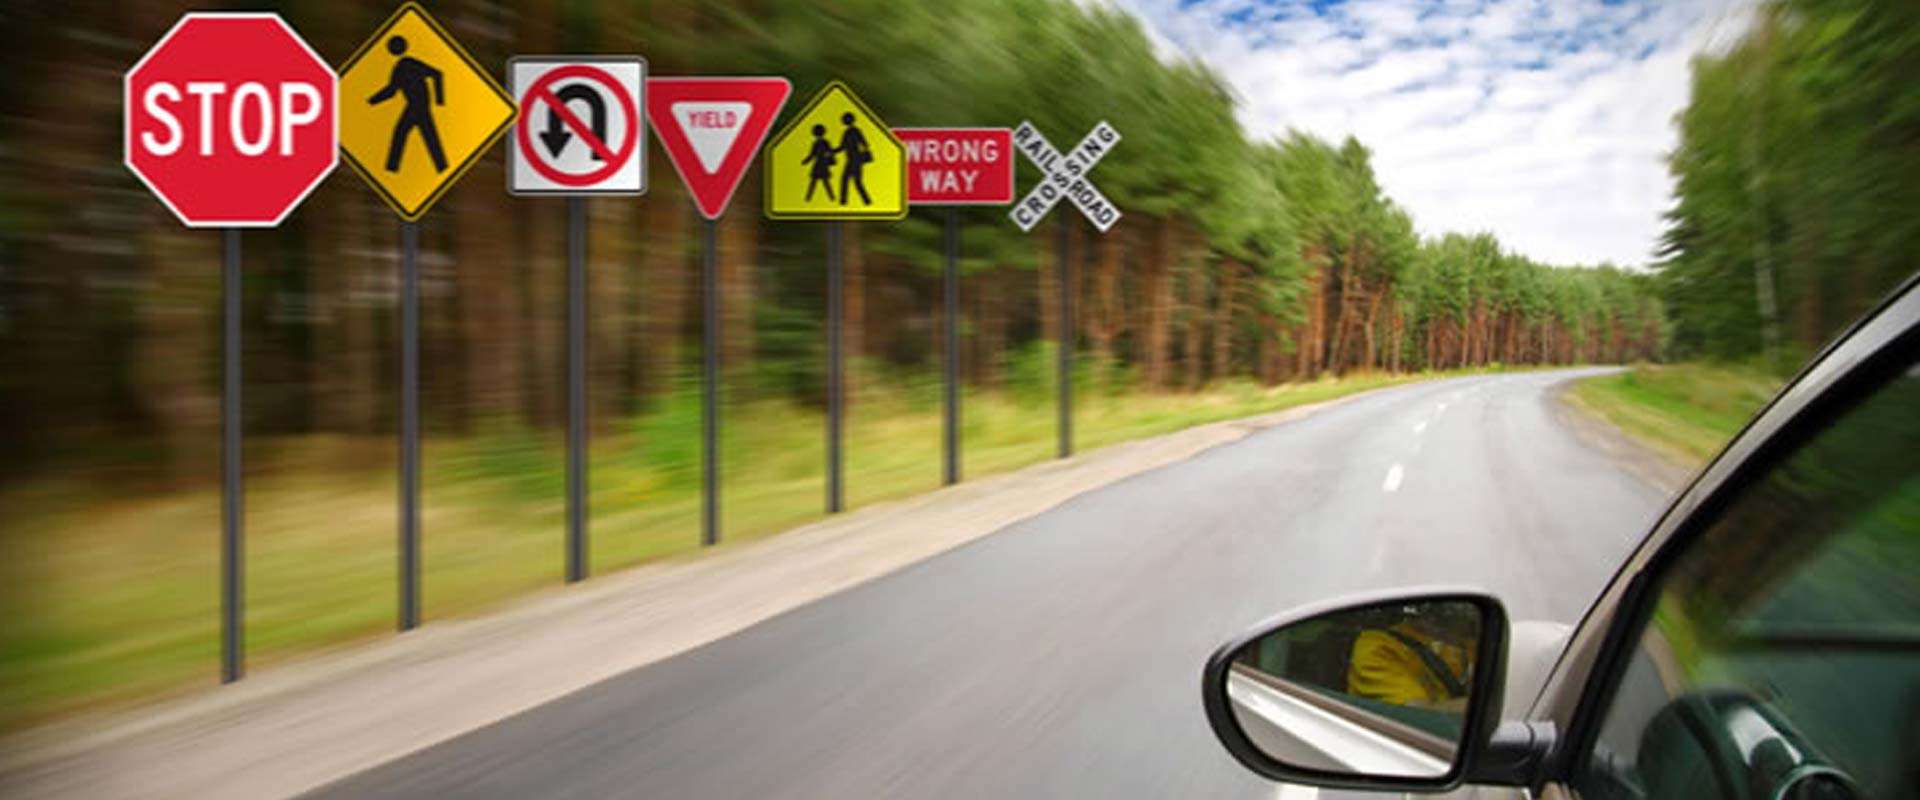 Road Safety Mandatory Sign Manufacturers in India